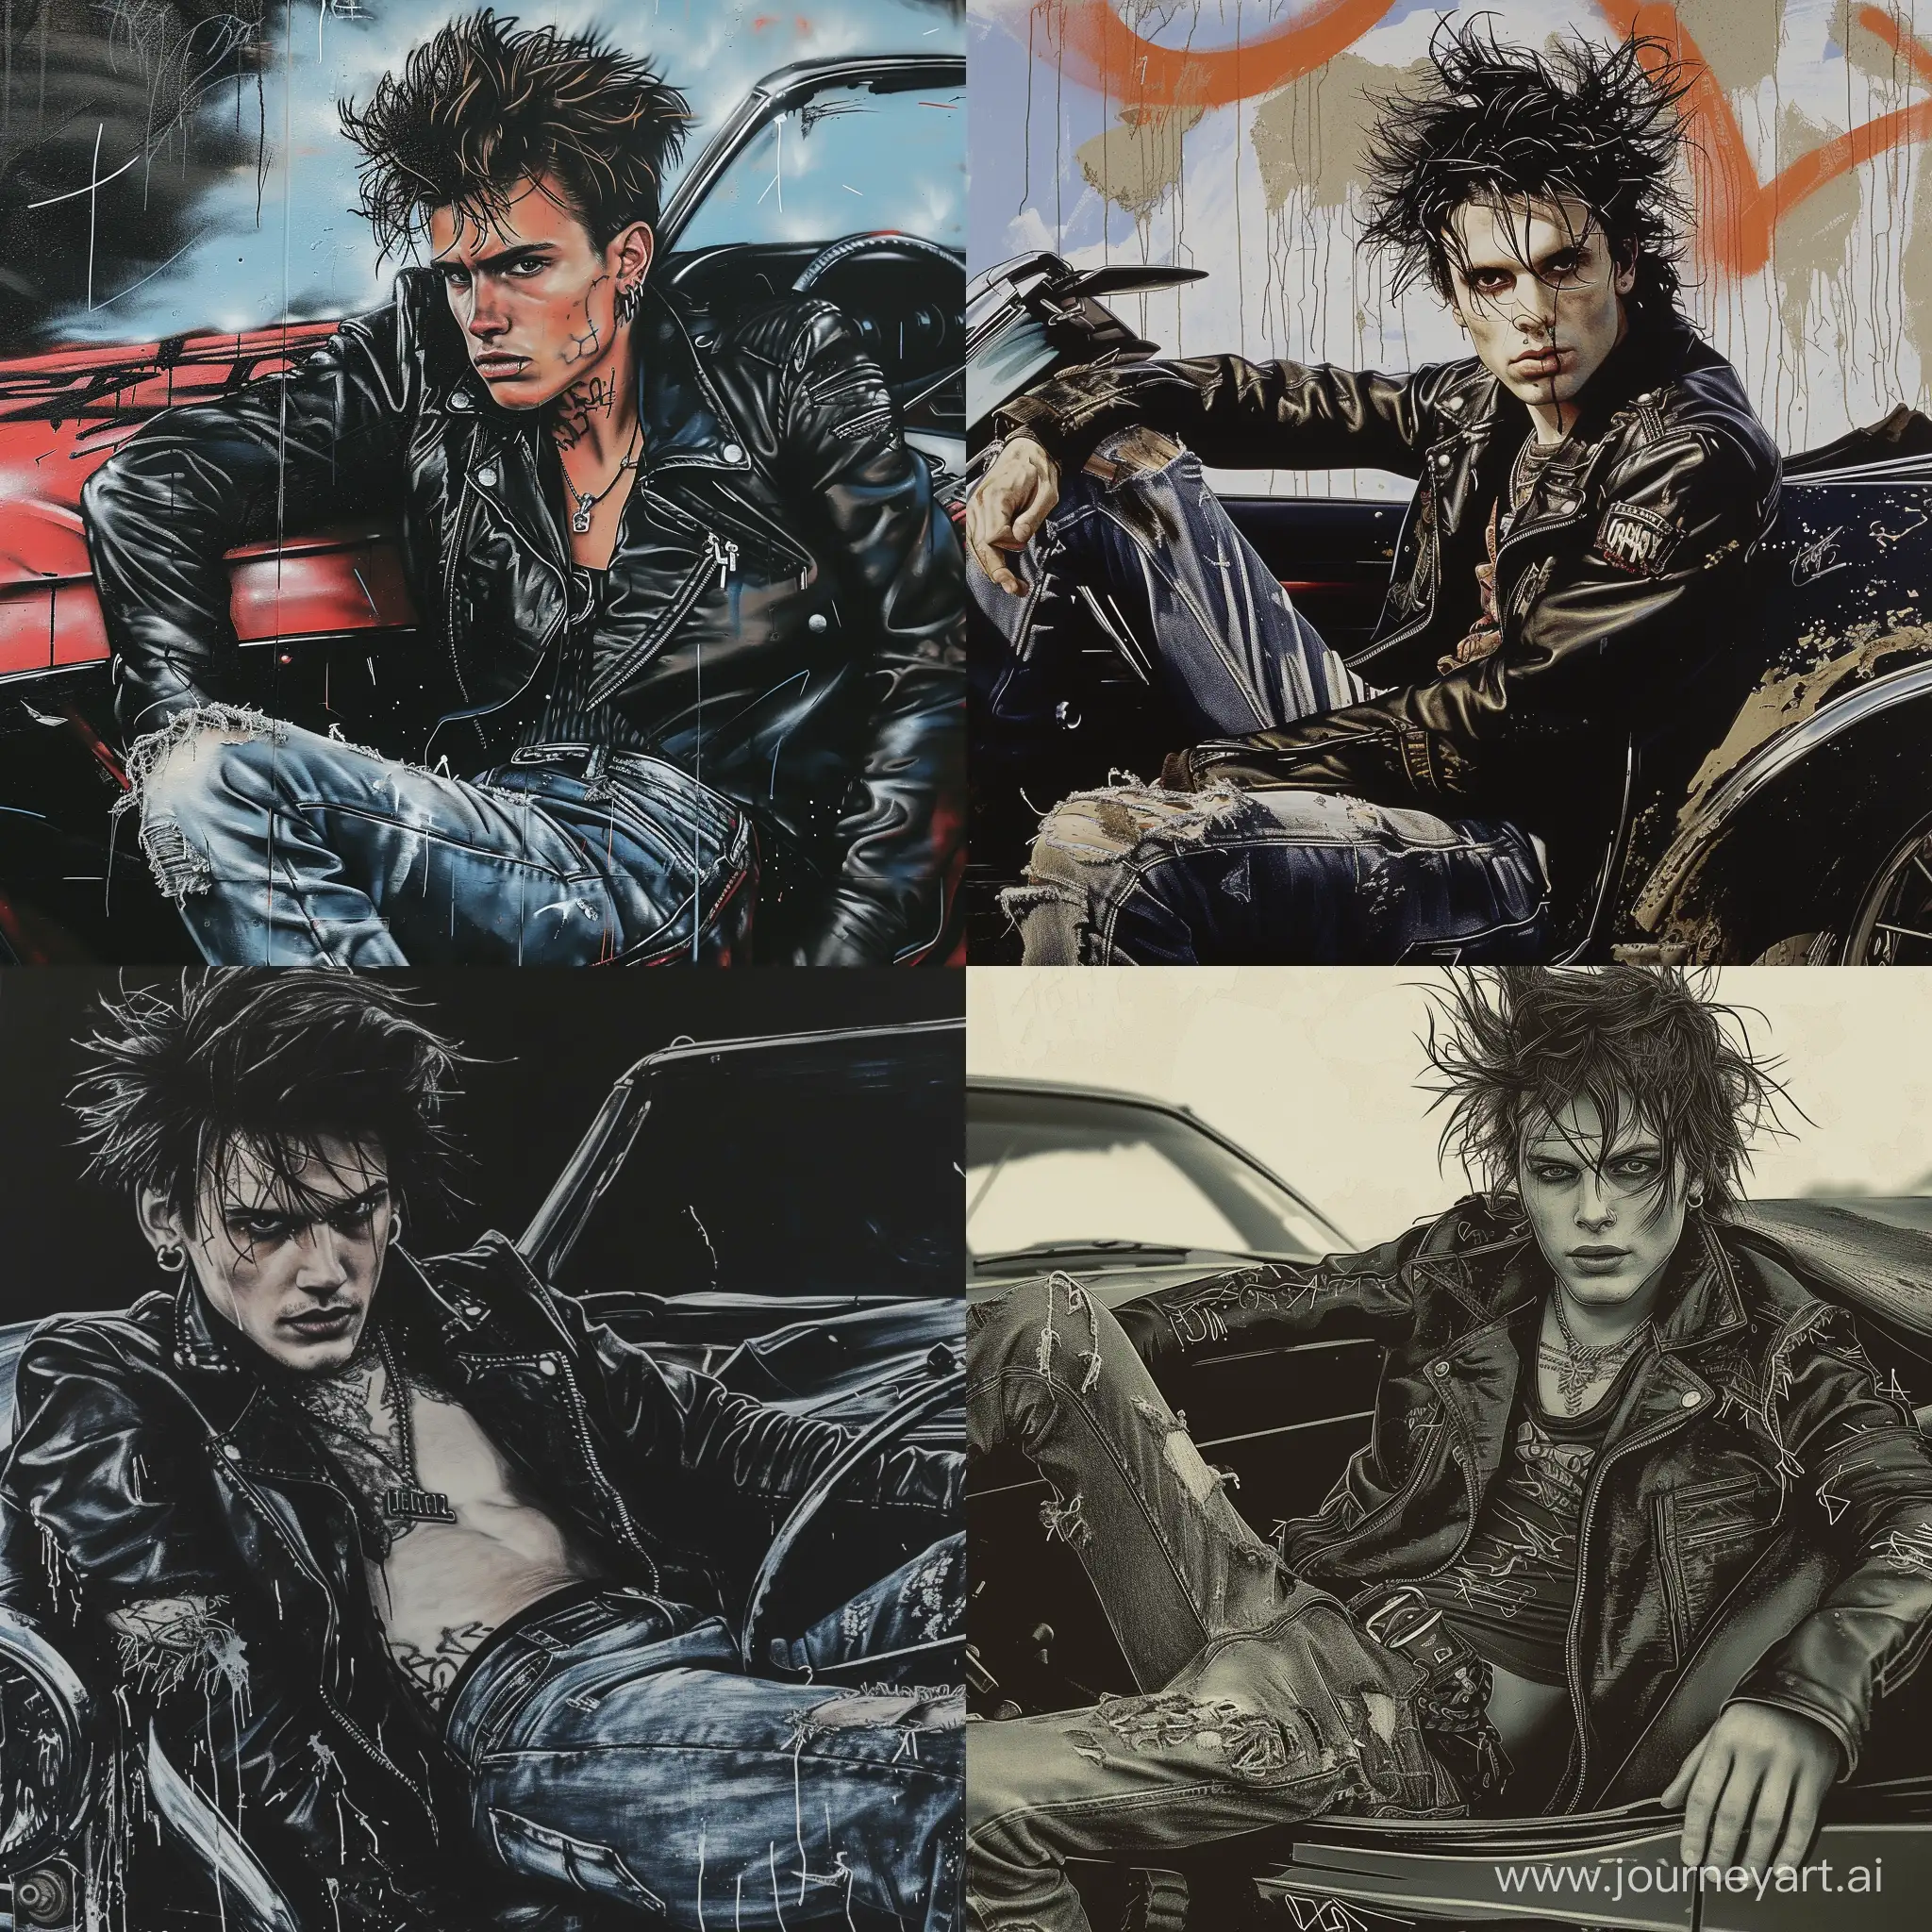 detailed portrait of a tough-looking punk man in his 20s, (graffiti), (muscle car), wearing a leather jacket and ripped jeans, messy hair and piercing eyes, sitting in a classic sports car, detailed, in the style of Banksy